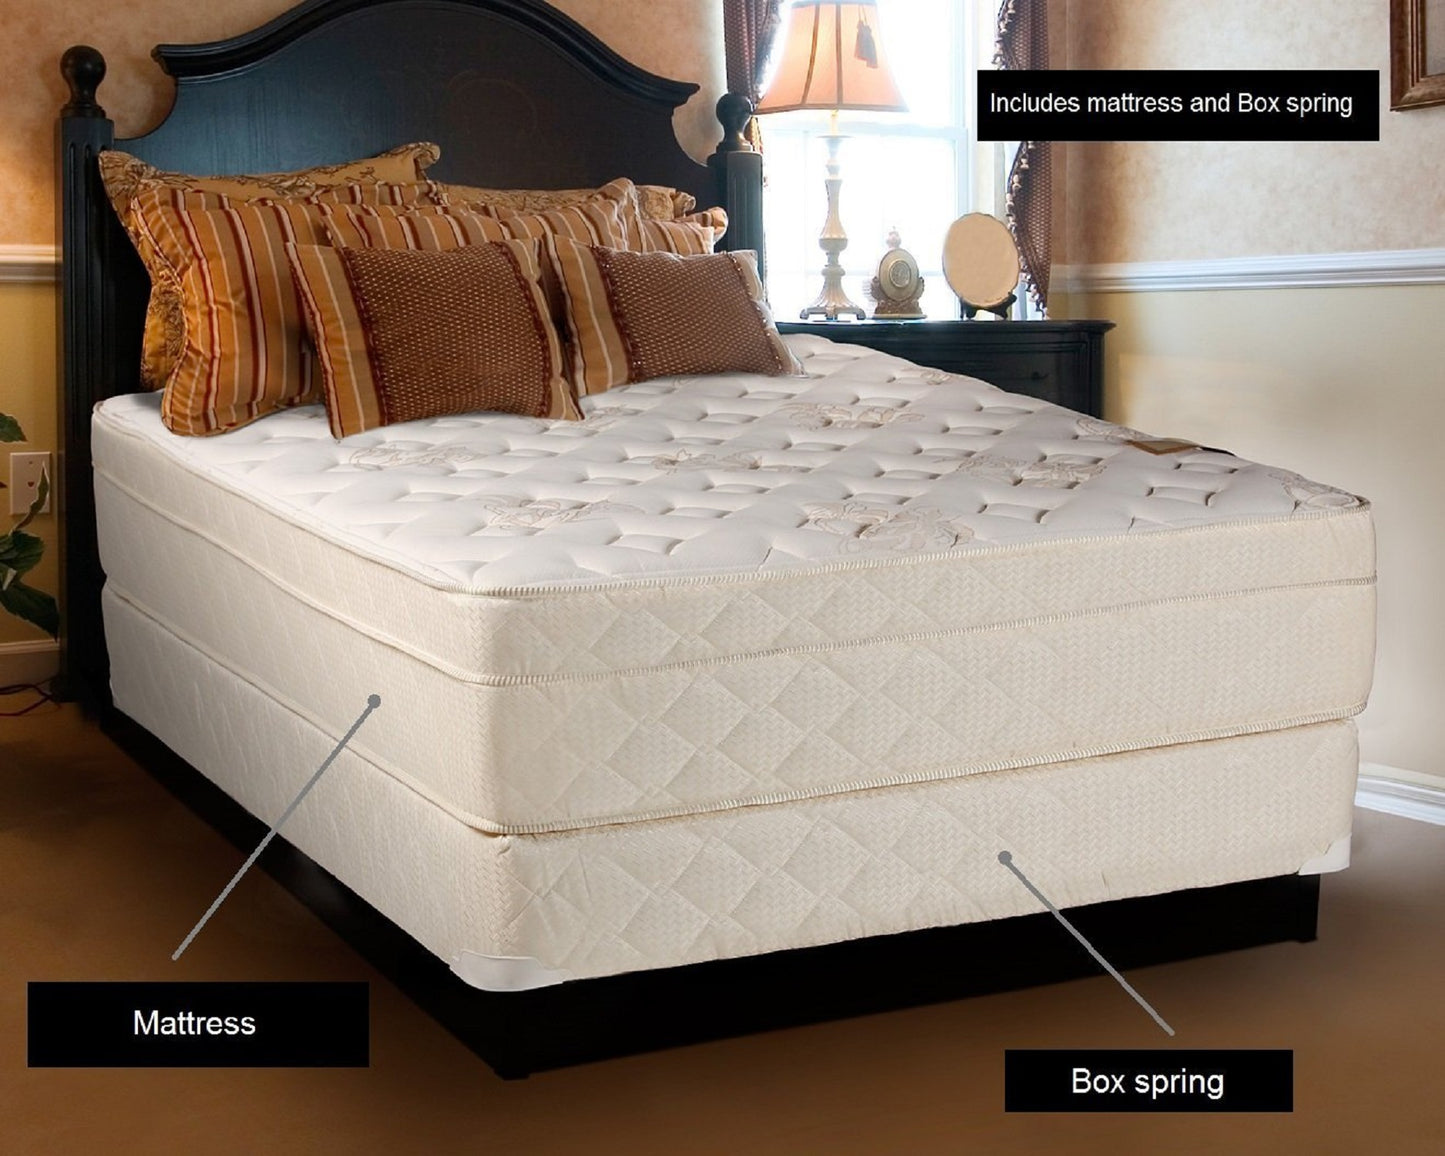 Beverly Hills Firm Foam Encased Eurotop (Pillow Top) Full Size Mattress and Box Spring Set